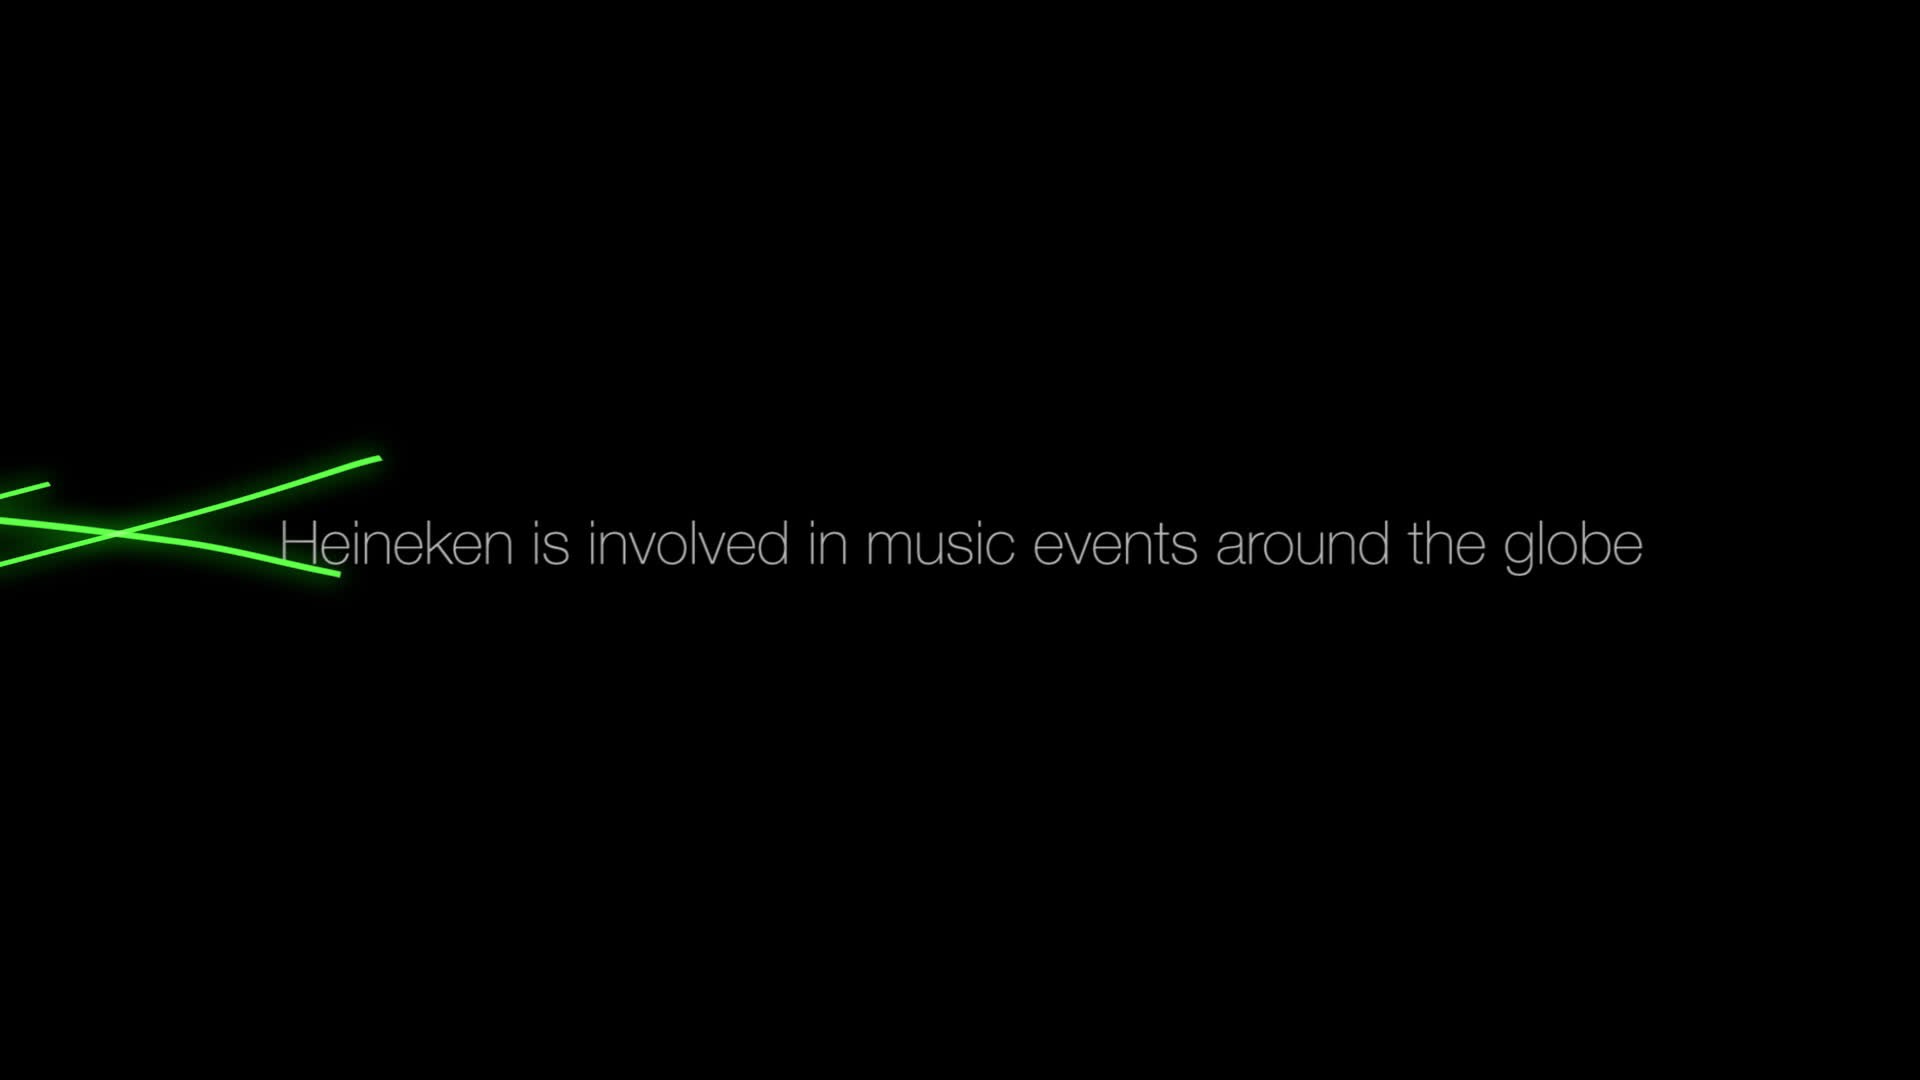 Heineken – The Takeover ‘The music belongs to the crowd’